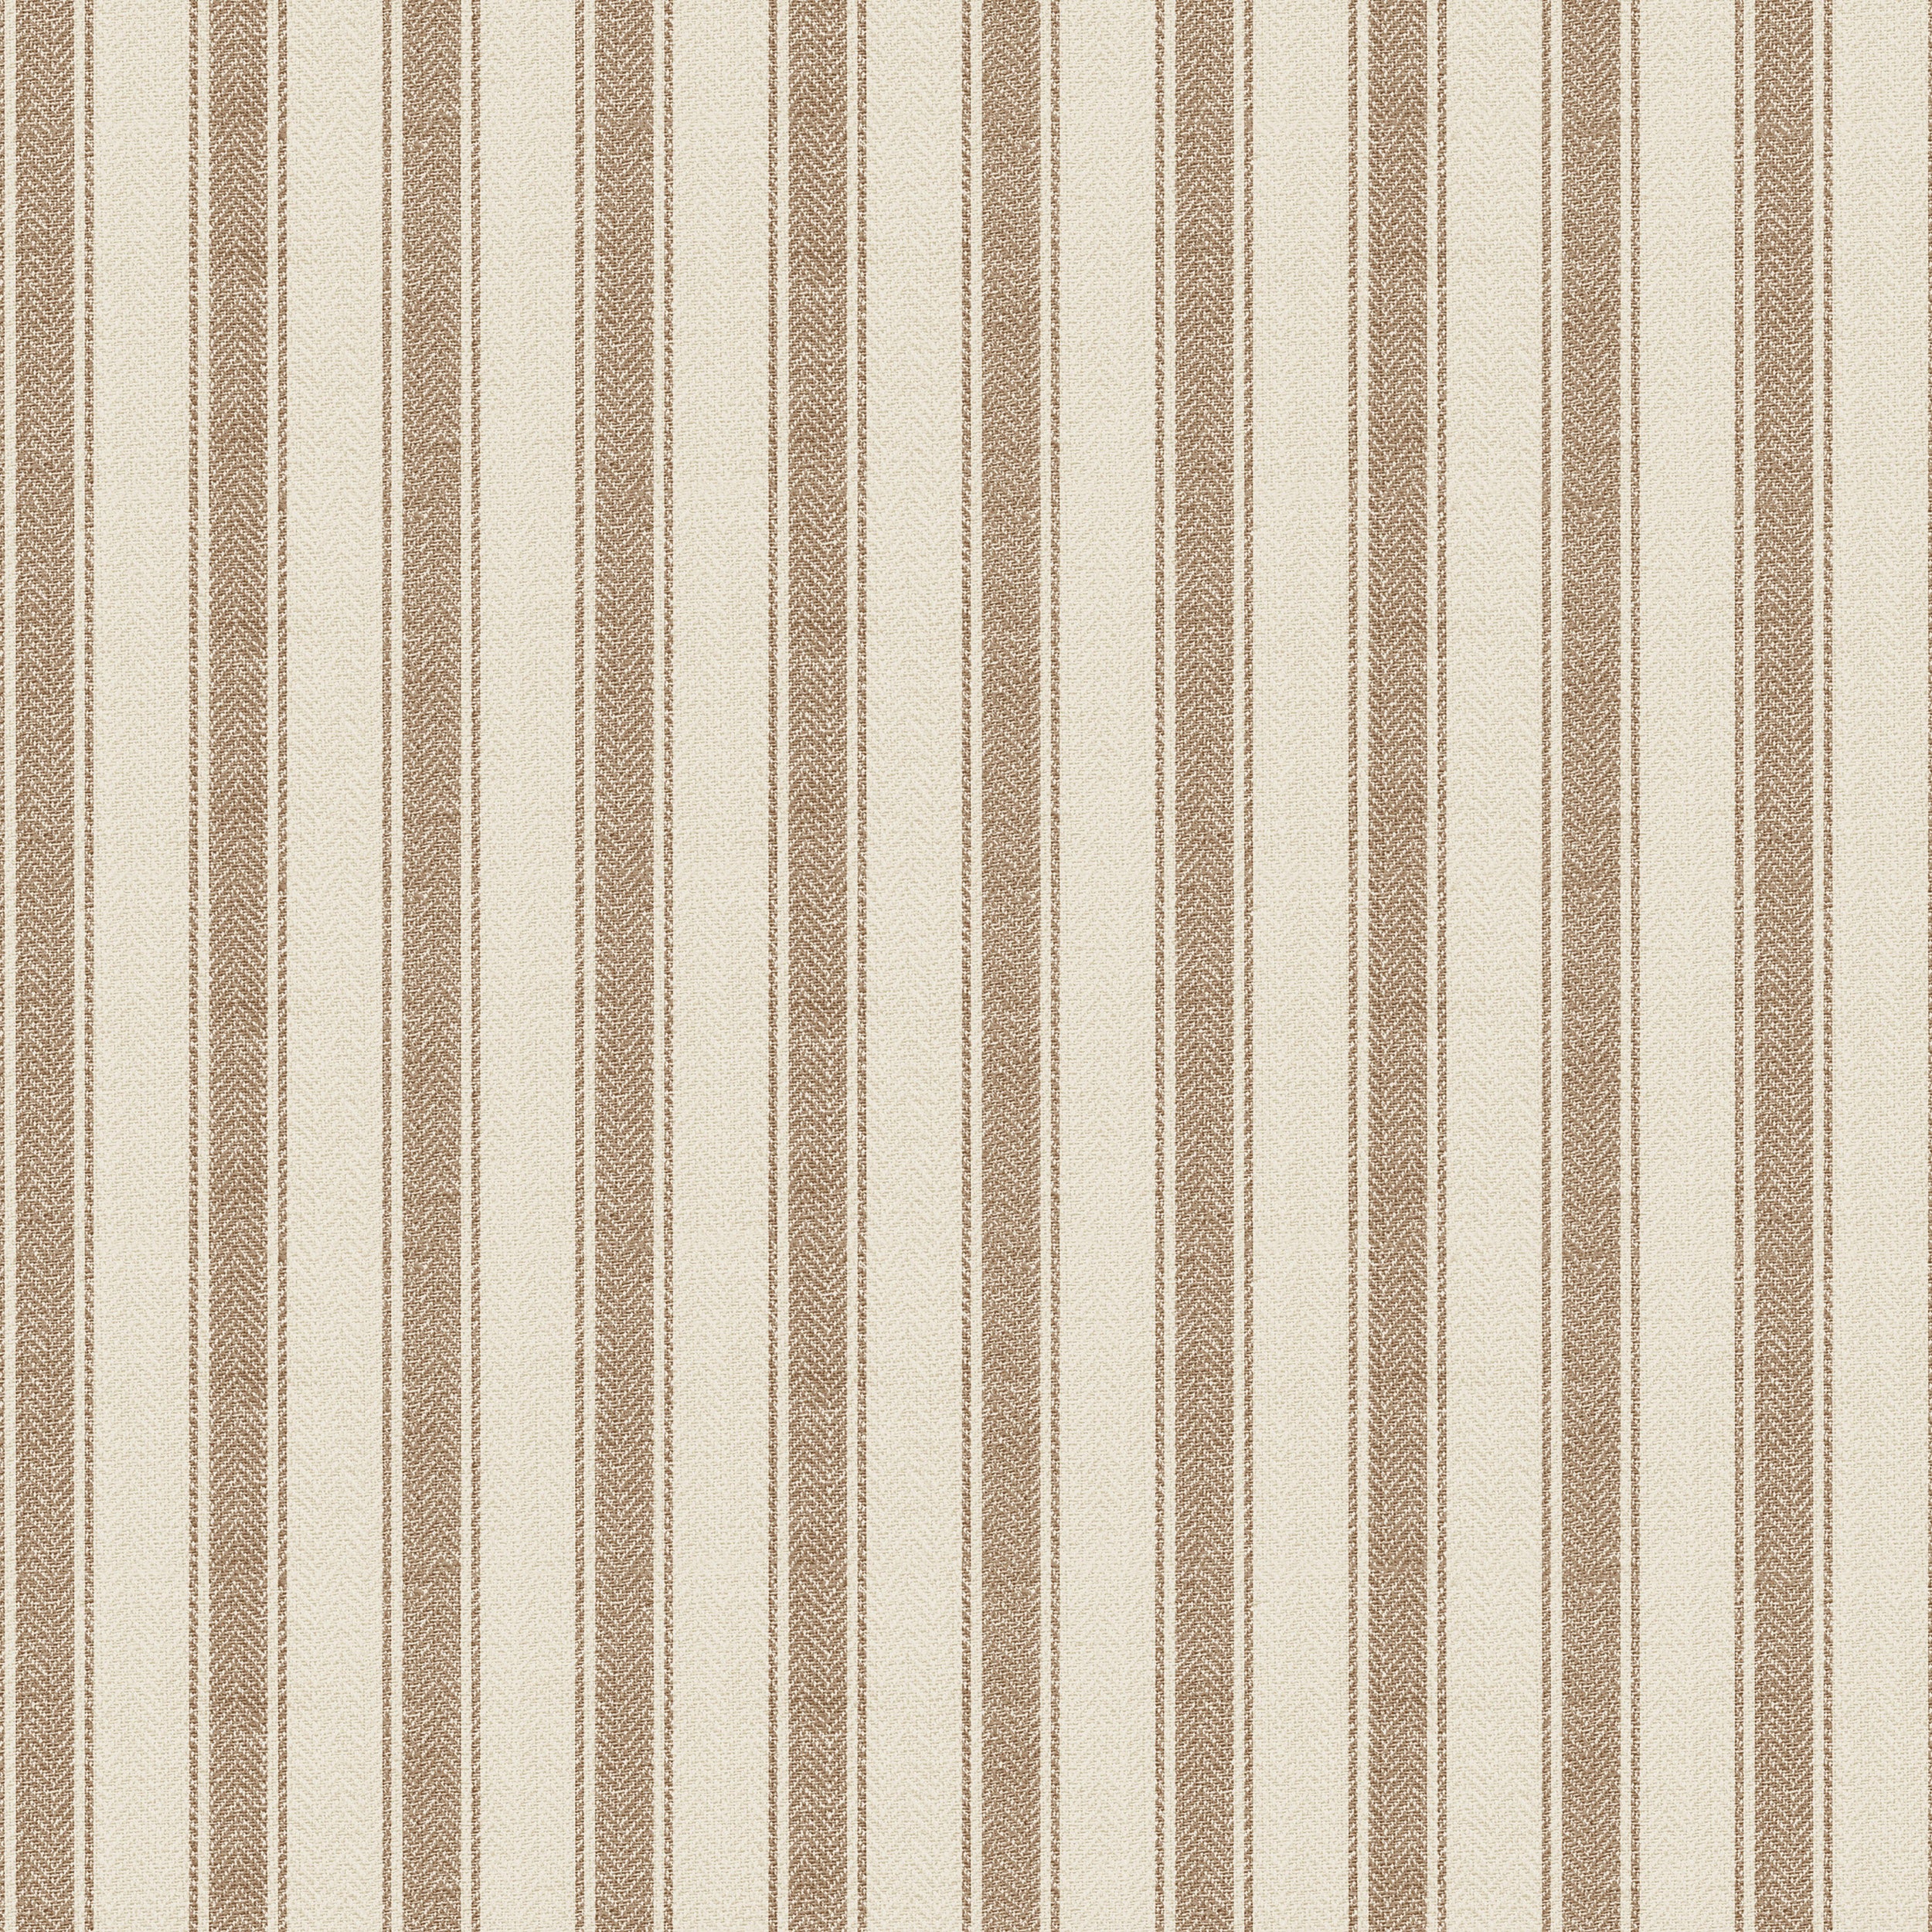 A sample of Striped Fabric Wallpaper with neatly arranged vertical stripes in alternating shades of tan and cream, exuding a classic elegance and simplicity that can effortlessly elevate any room's decor